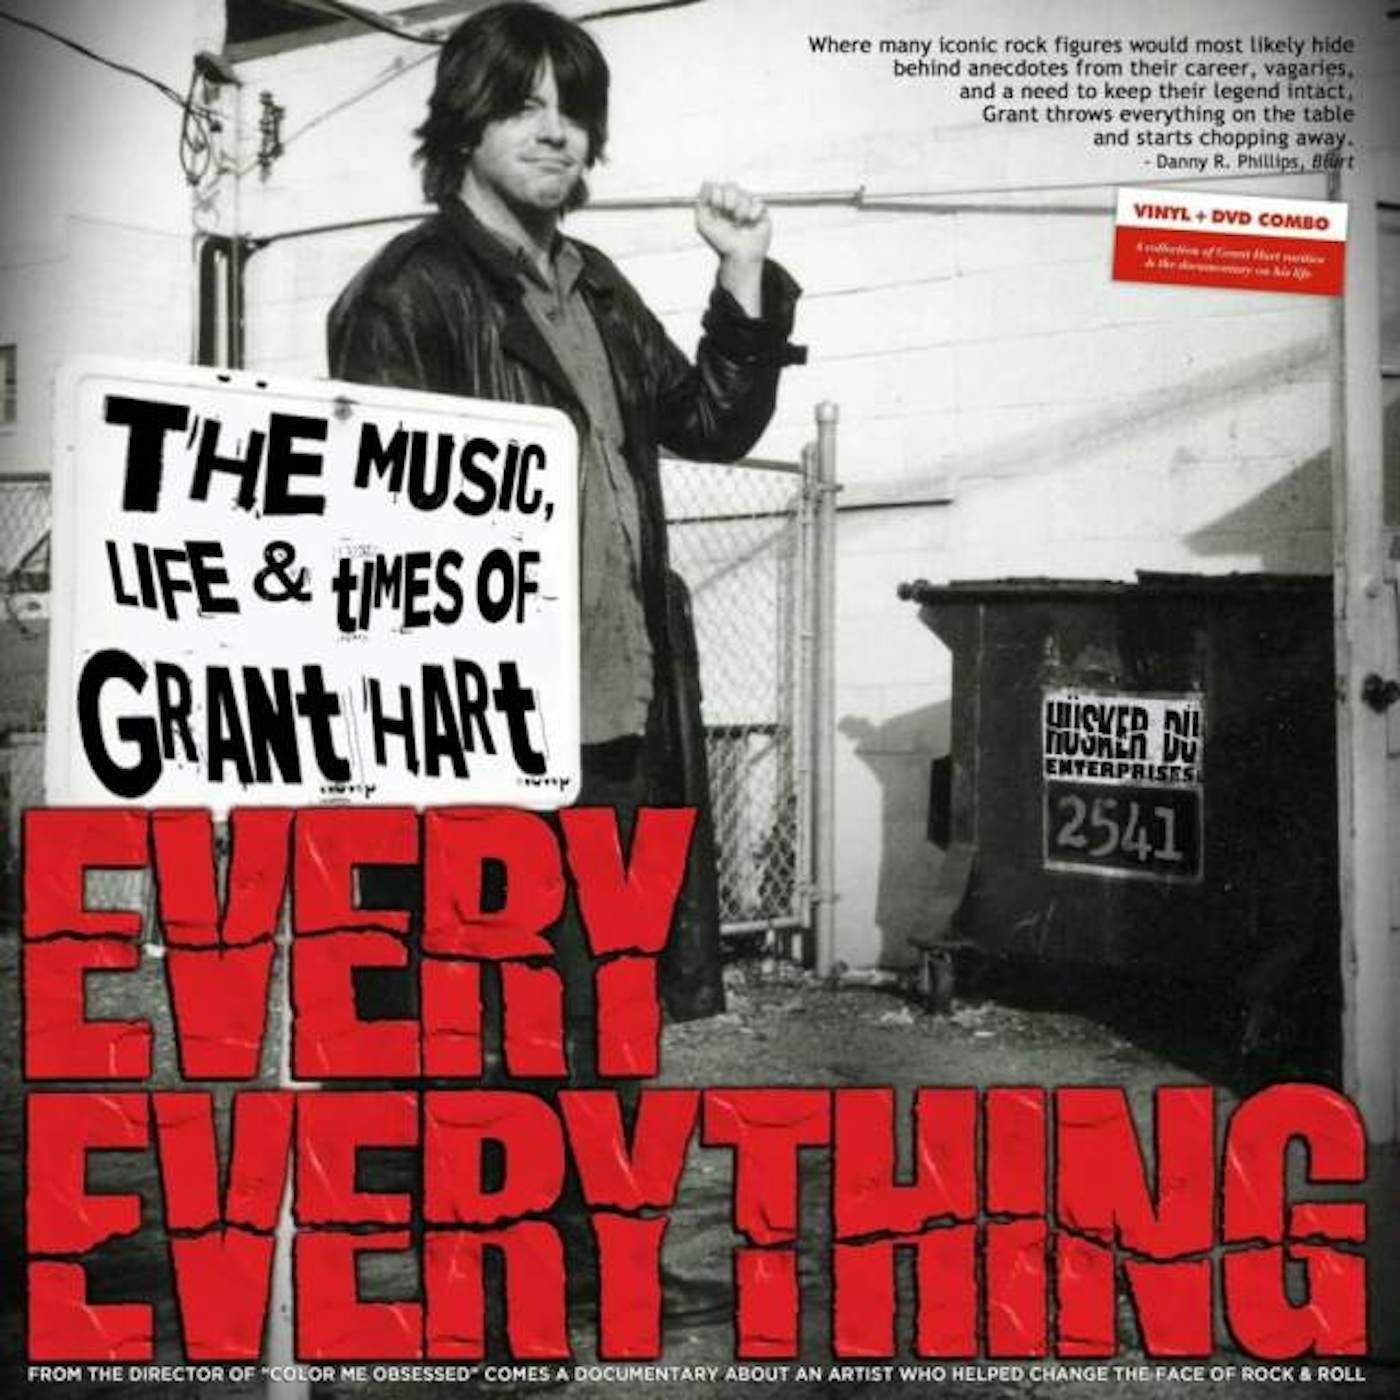 Grant Hart EVERY EVERYTHING & SOME SOMETHING (W/DVD) Vinyl Record